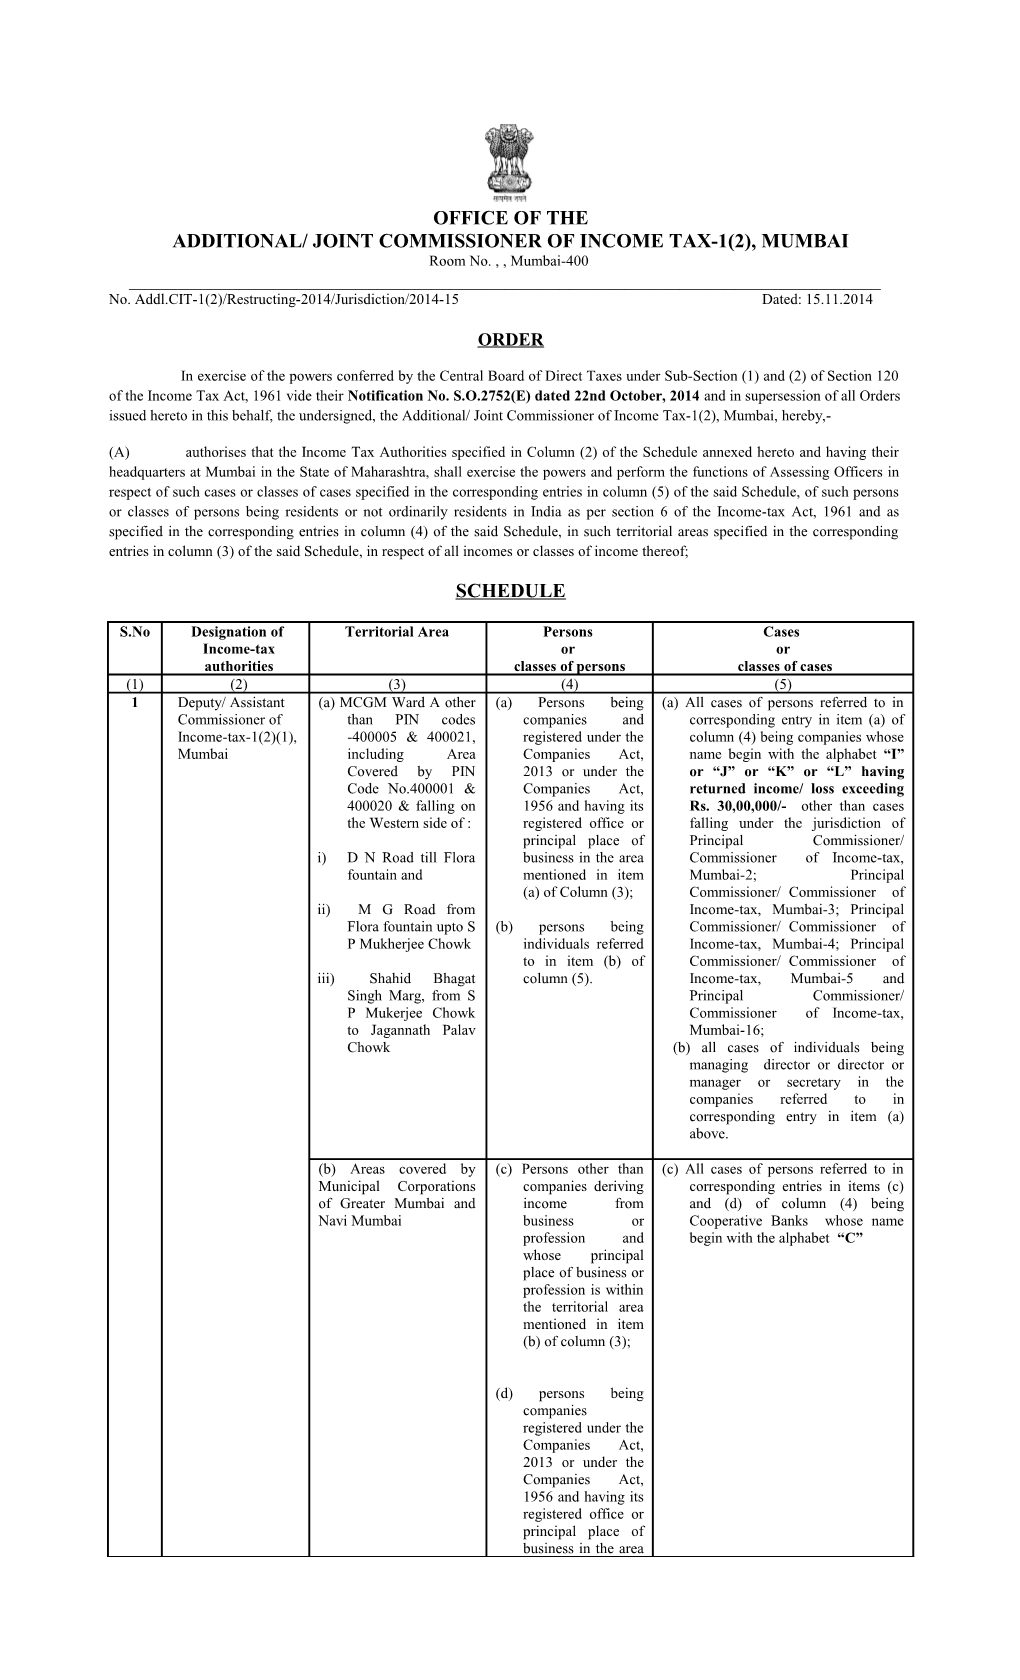 Additional/ Joint Commissioner of Income Tax-1(2), Mumbai